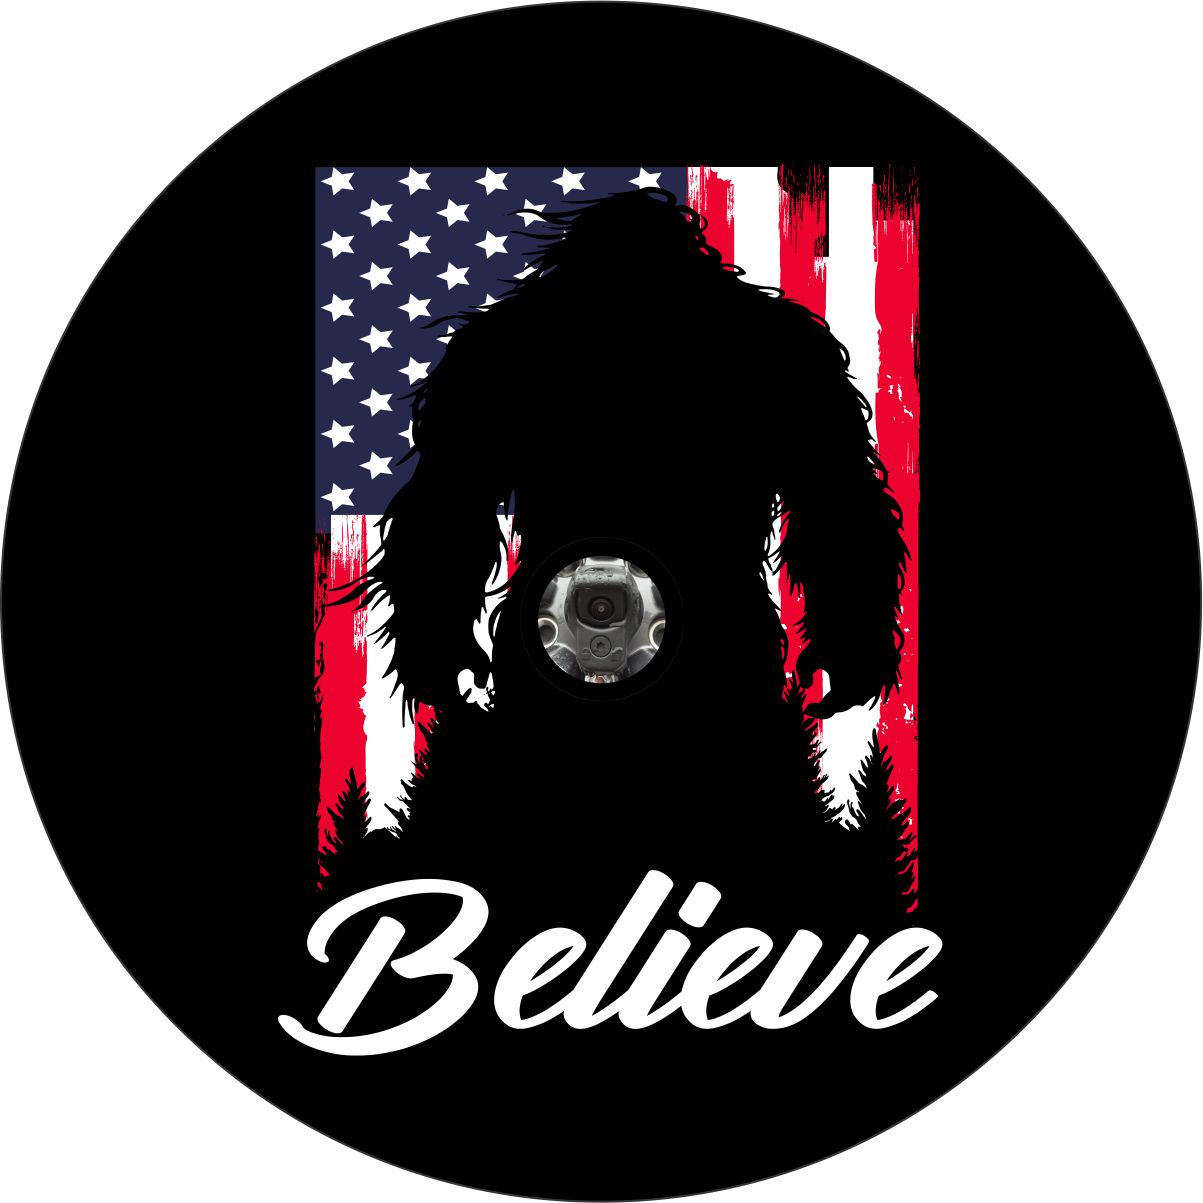 A vinyl spare tire cover design of a painted American flag with the silhouette of a sasquatch and the word believe written in cursive across the bottom + designed for a spare tire cover that needs a camera hole for a back up camera.